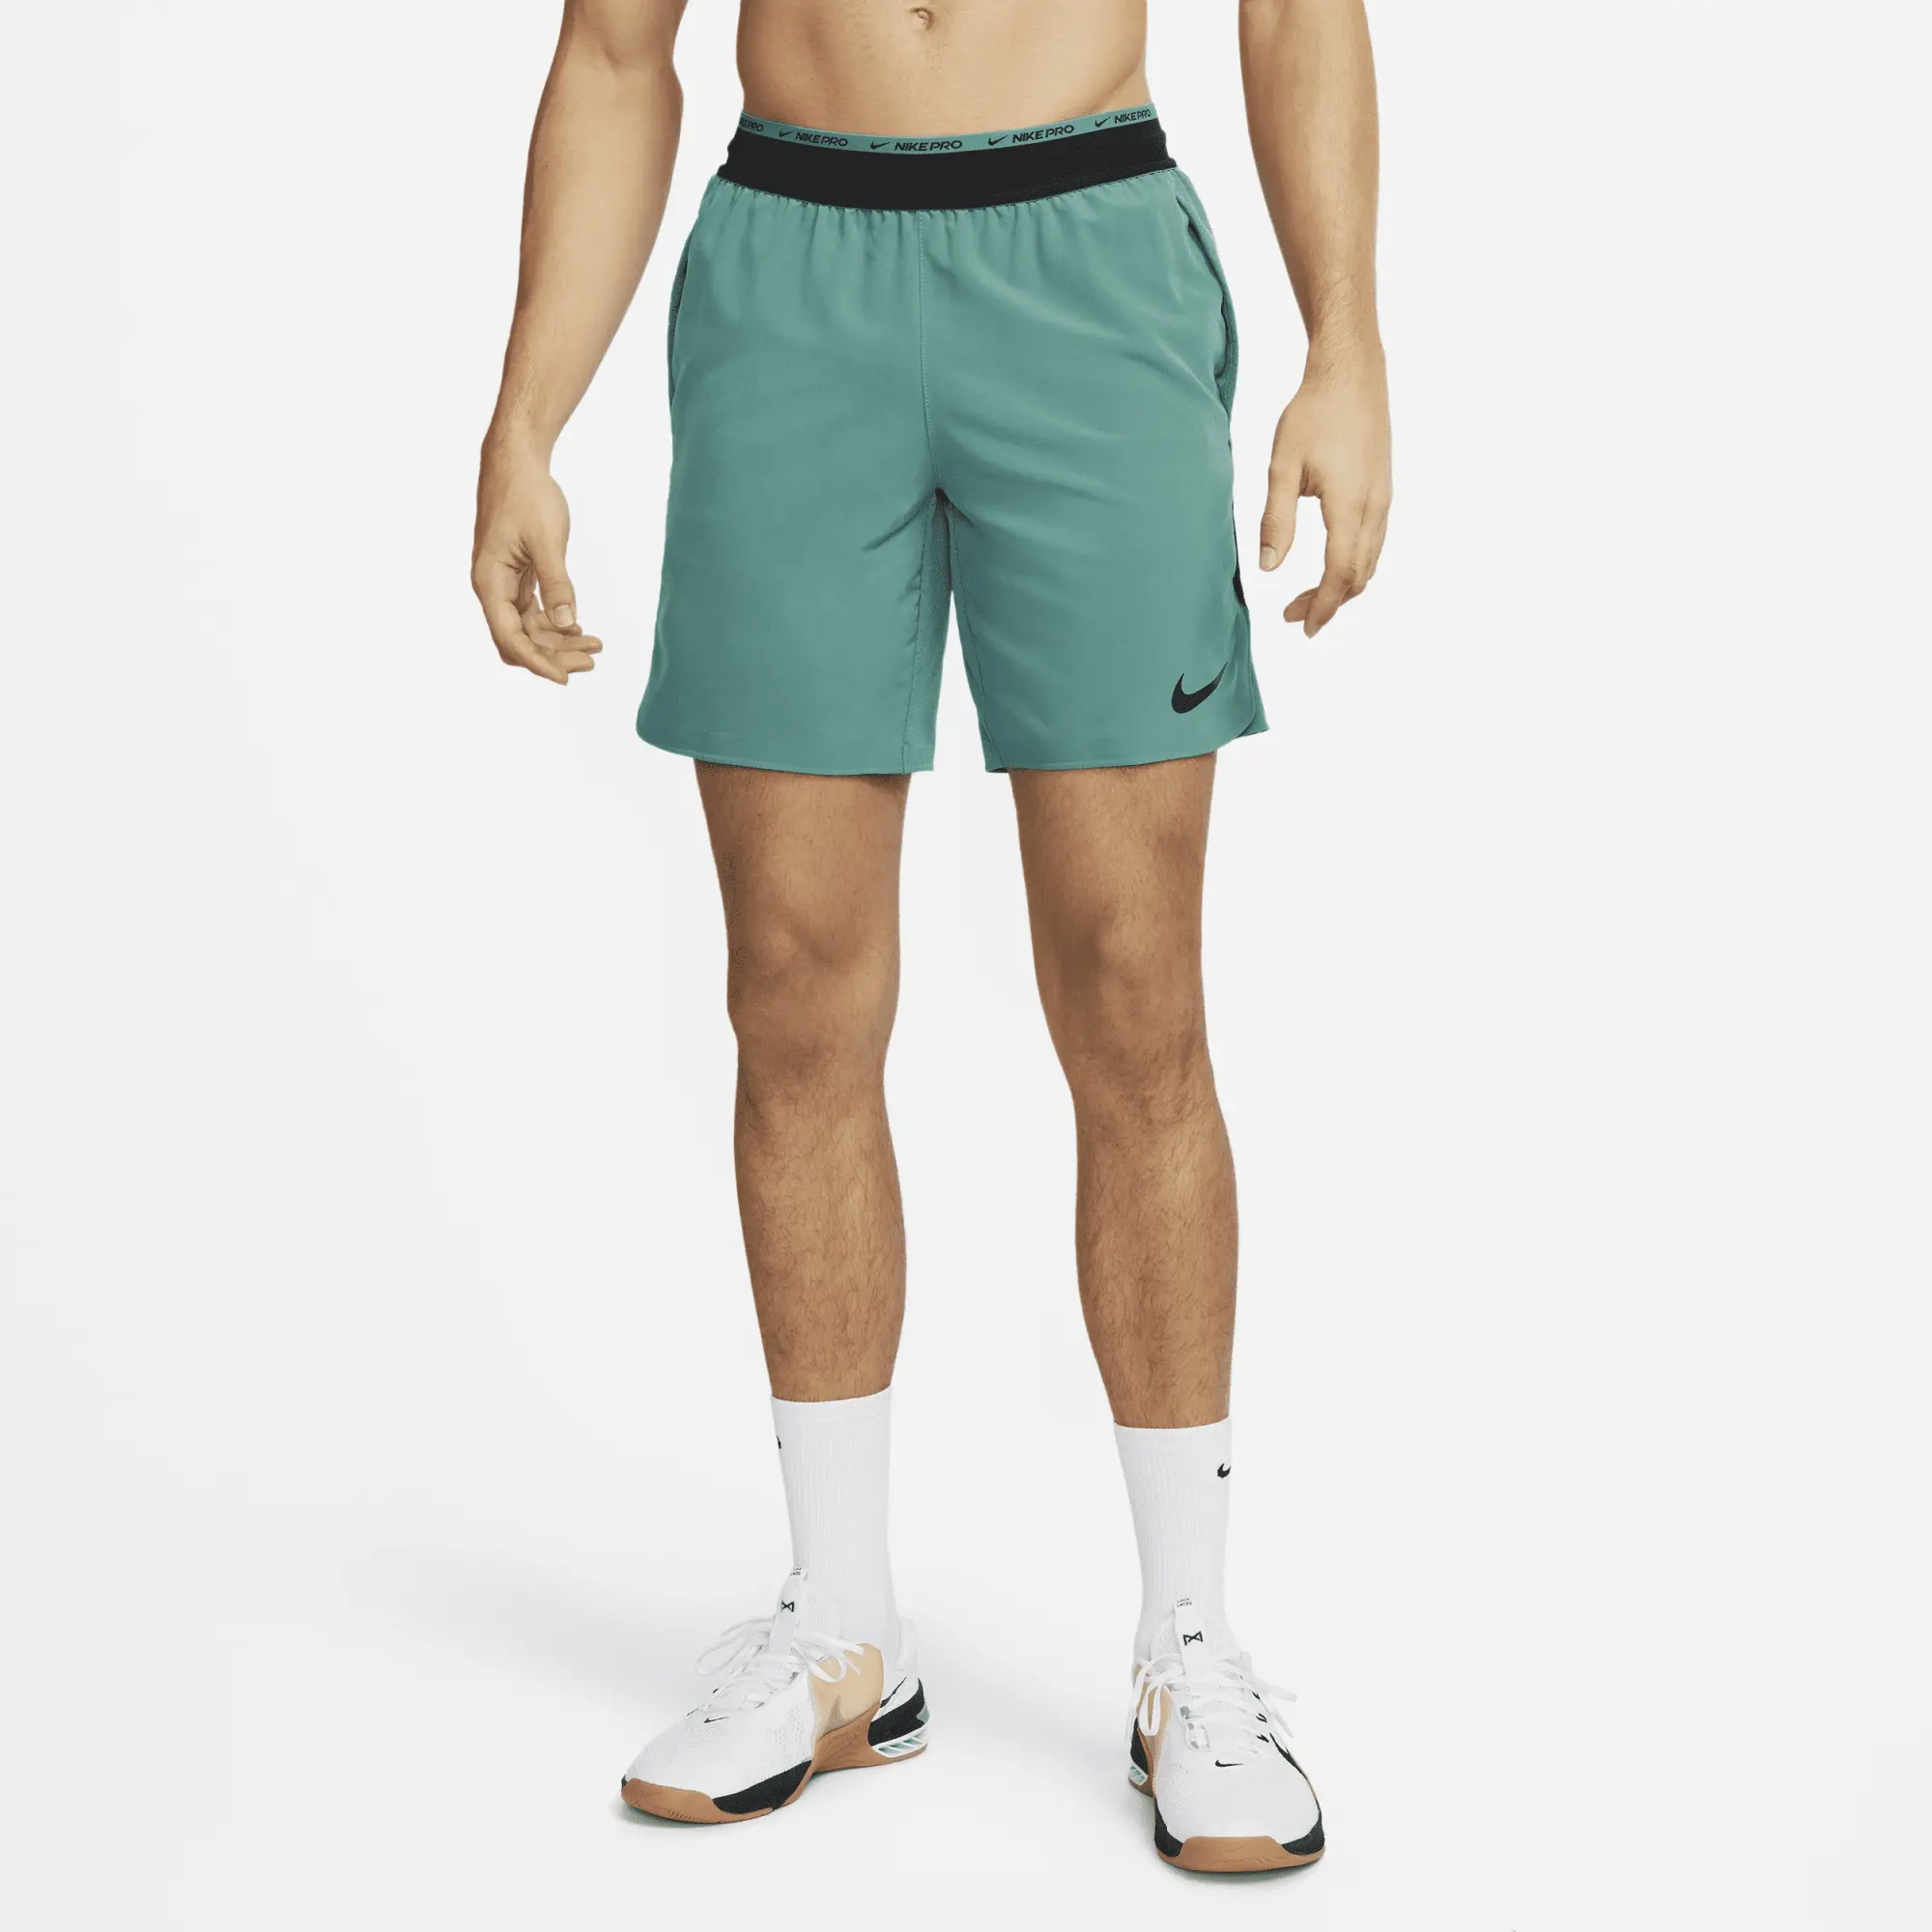 Nike Training Pro Flex Rep Shorts In Teal-Green